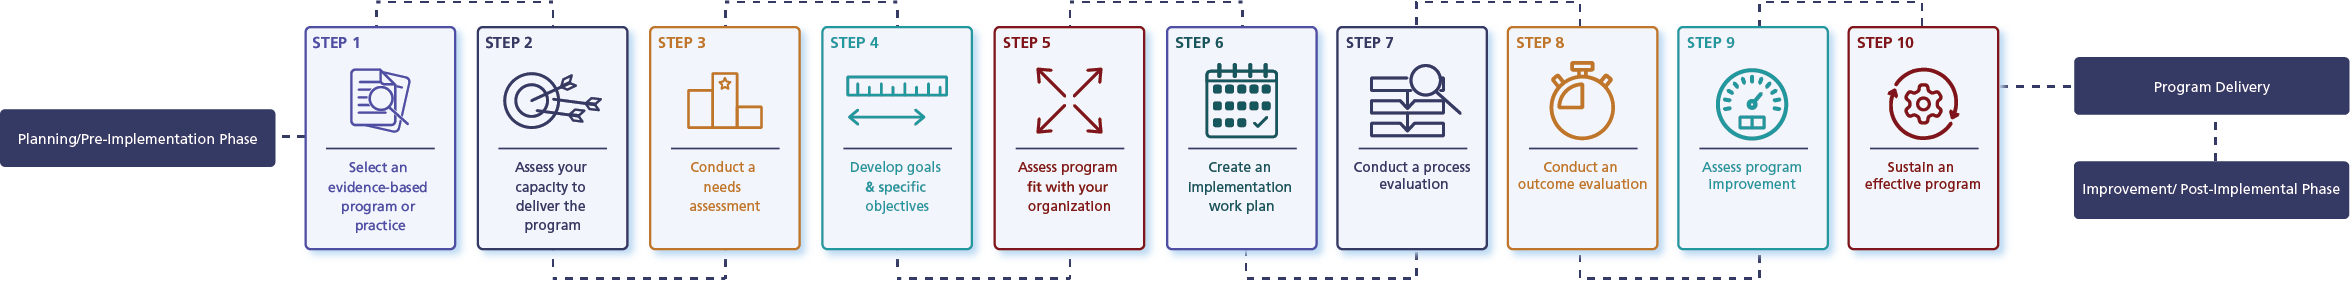 Flow chart outlining the program implementation process, beginning with the Planning/Pre-Implementation Phase, moving on to the ten steps of the GTO process, and ending with Program Delivery and the Improvement/Post-Implementation Phase.